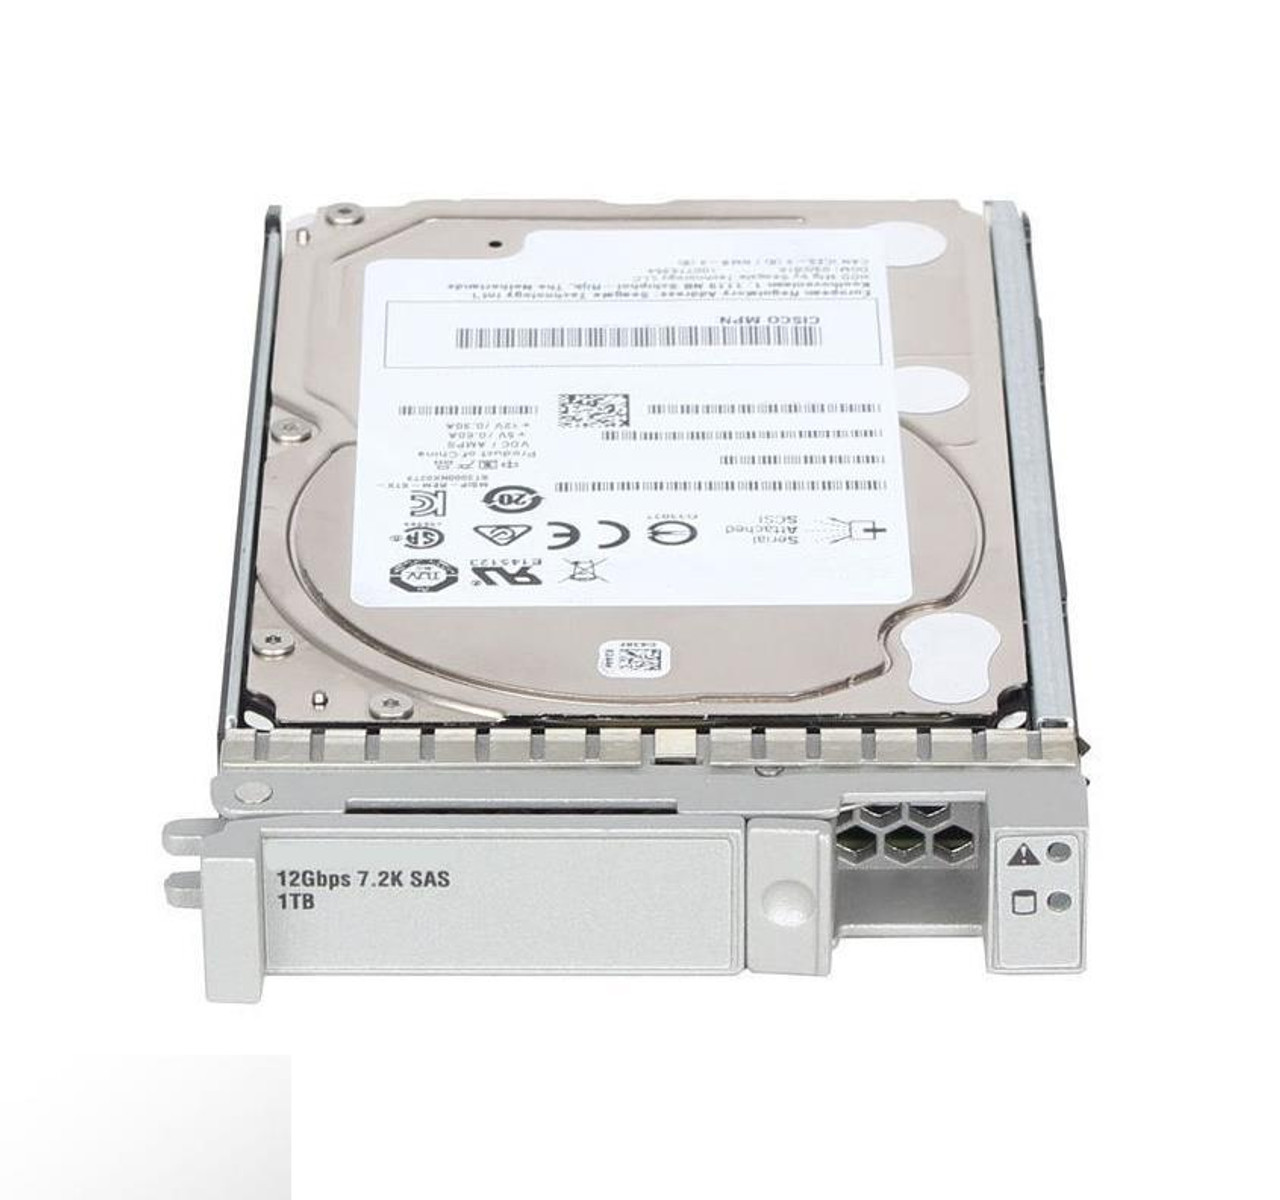 Cisco 18TB 7200RPM SAS 12Gbps (4K) 3.5-inch Internal Hard Drive with Carrier Top Load